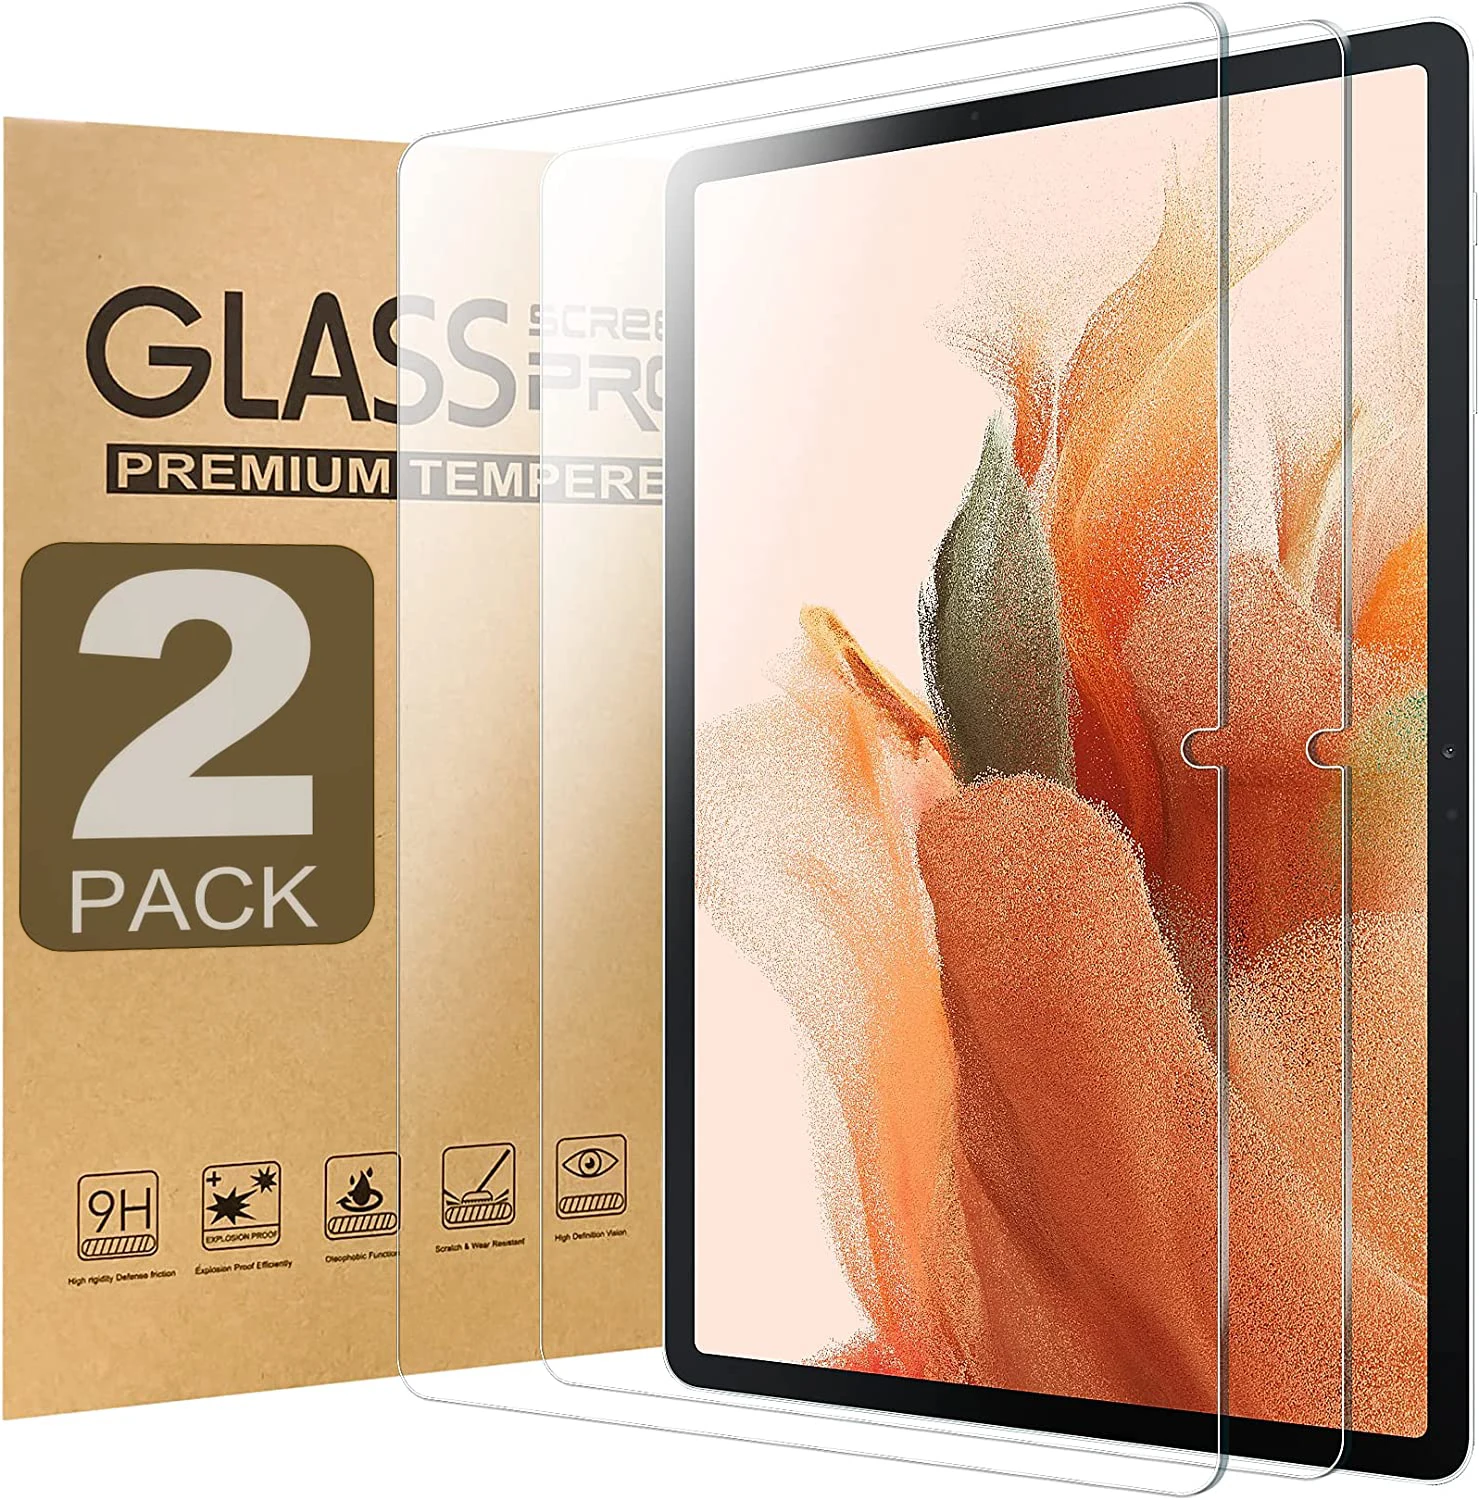 2pcs Screen Protector Tempered Glass For Samsung Galaxy S7 FE 12.4'' 2021 s7 fe SM-T730 SM-T735 SM-T736B HD Clear Tablet Film 9h hardness tablet tempered glass for samsung tab s7 fe 12 4 inch sm t730 t736 cover hd clear screen protector galaxy s7 plus